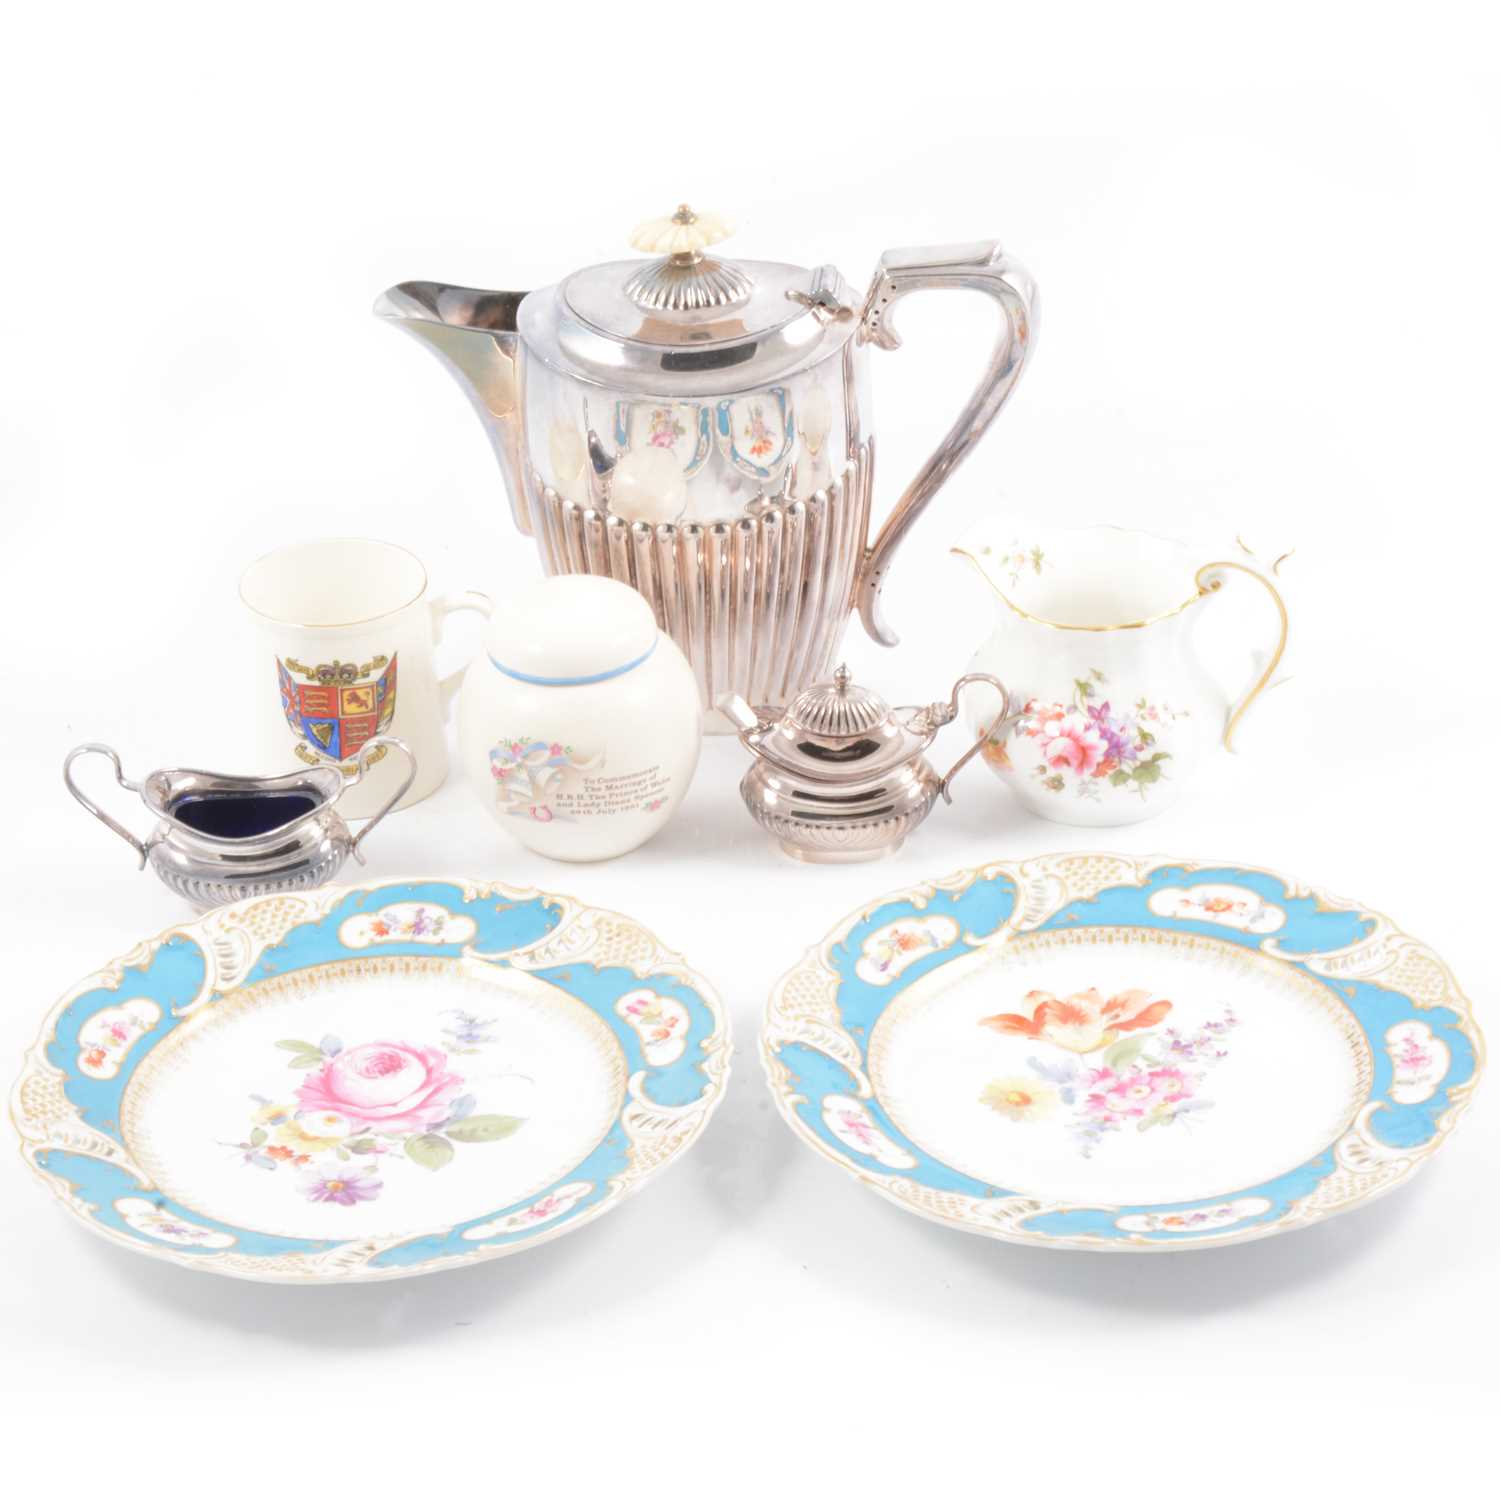 Lot 11 - Nymphenburg comport and plates, royal commemorative mugs, and silver-plated wares.